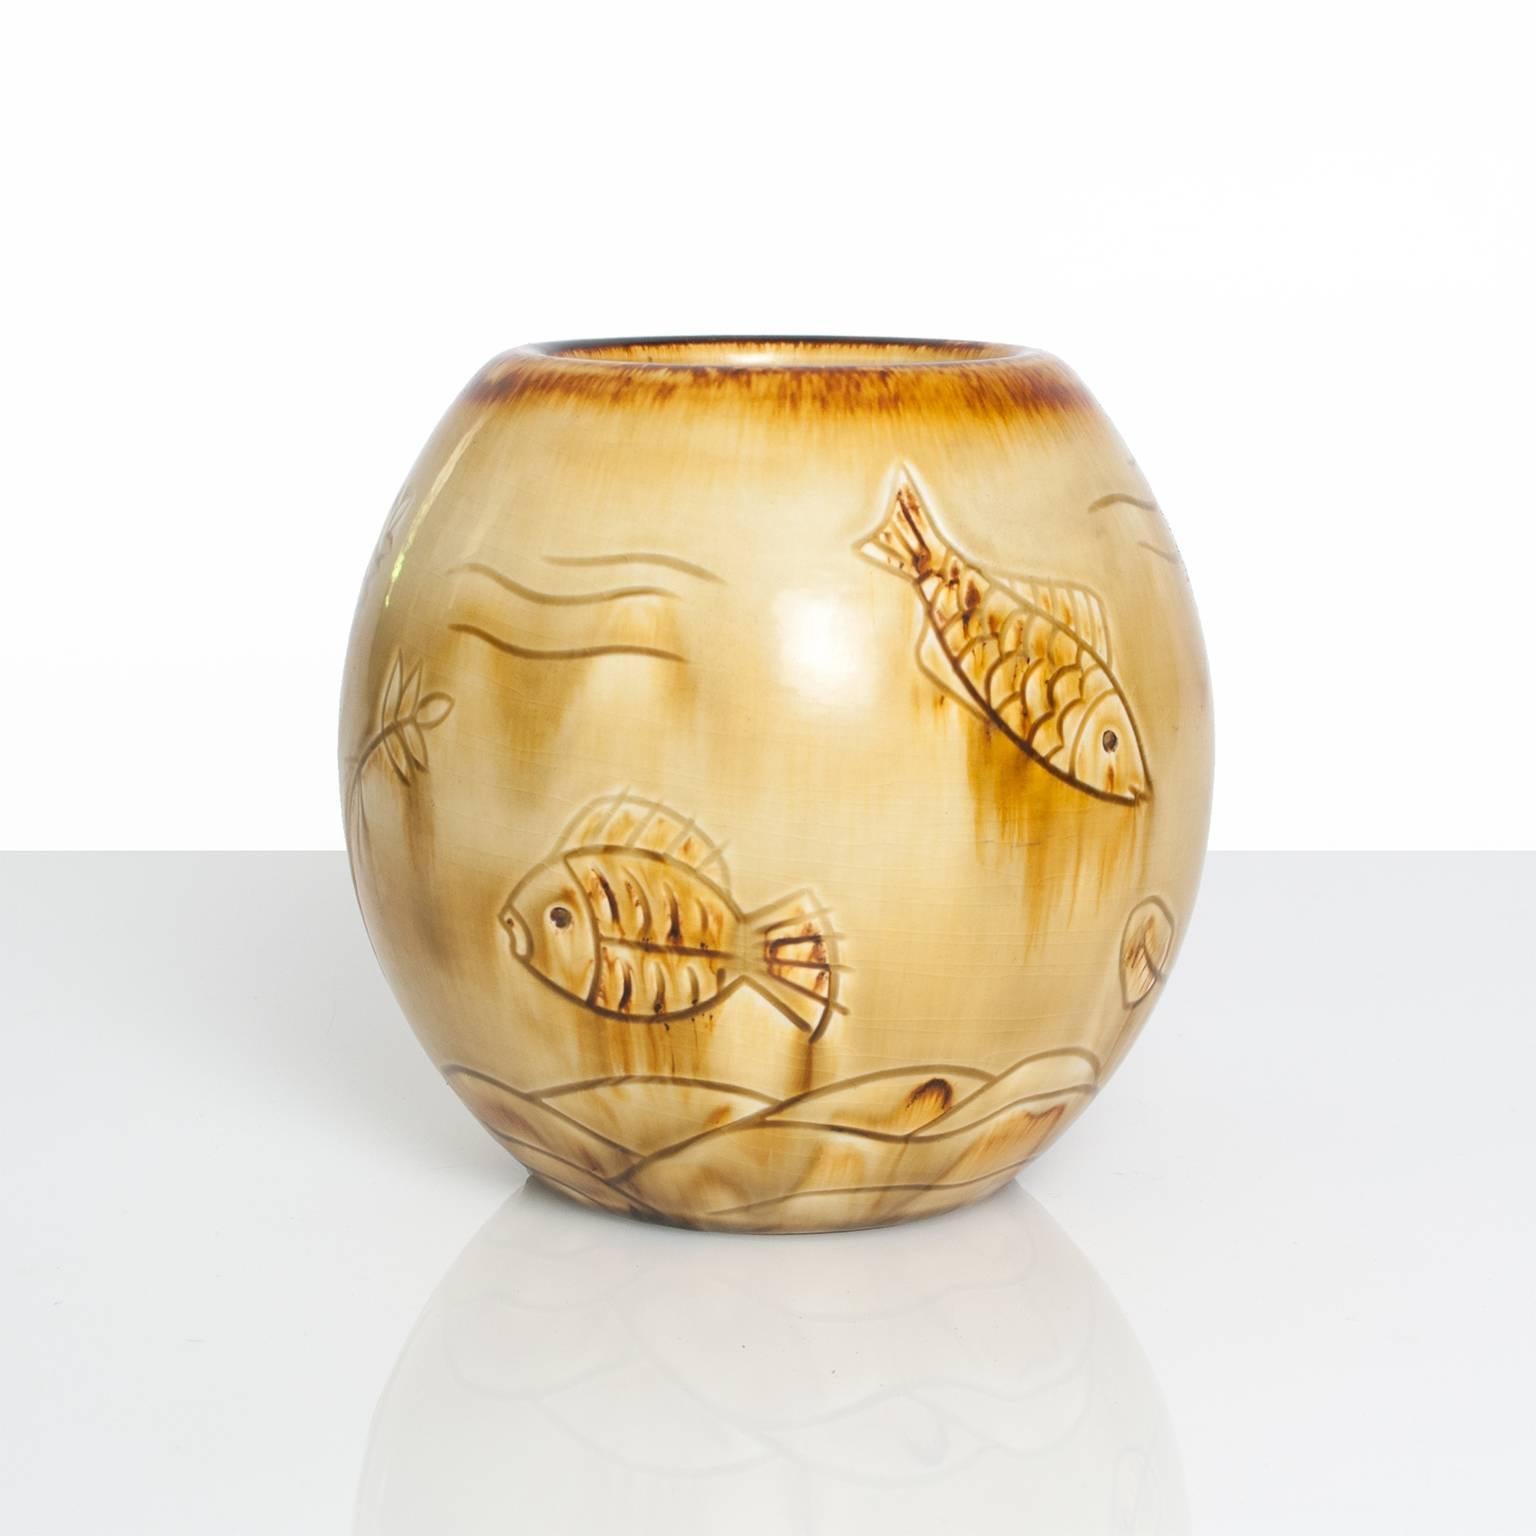 A unique Scandinavian studio vase by Gertrud Lonegren for Rorstrand with fish motif. Created circa 1938-1942.
Diameter: 7